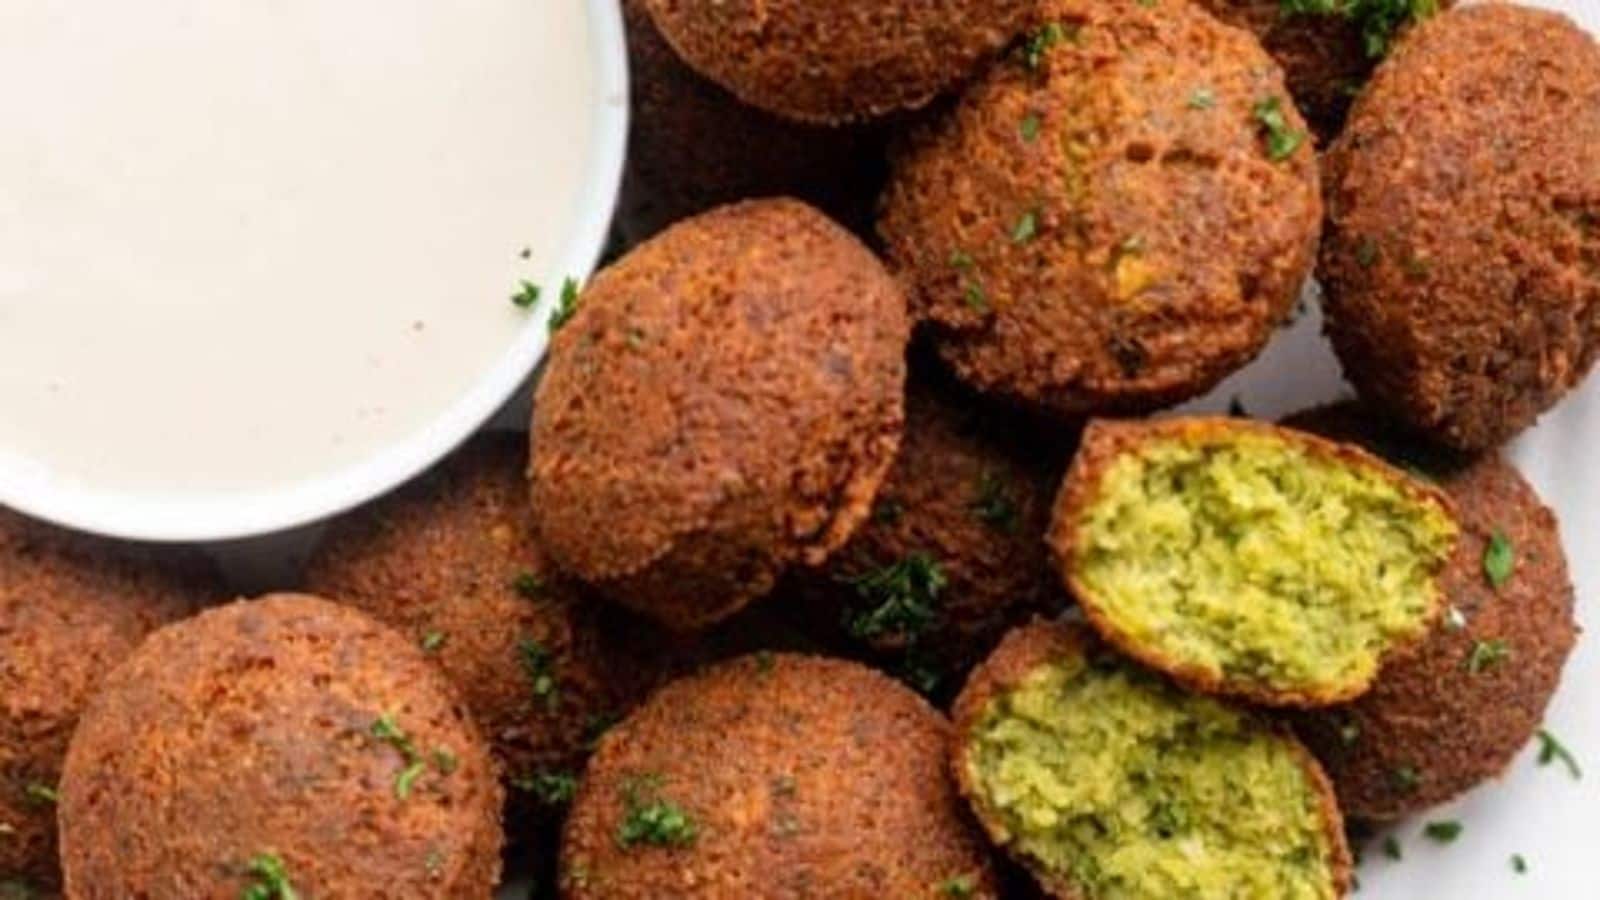 Your guests will love this Lebanese falafel recipe